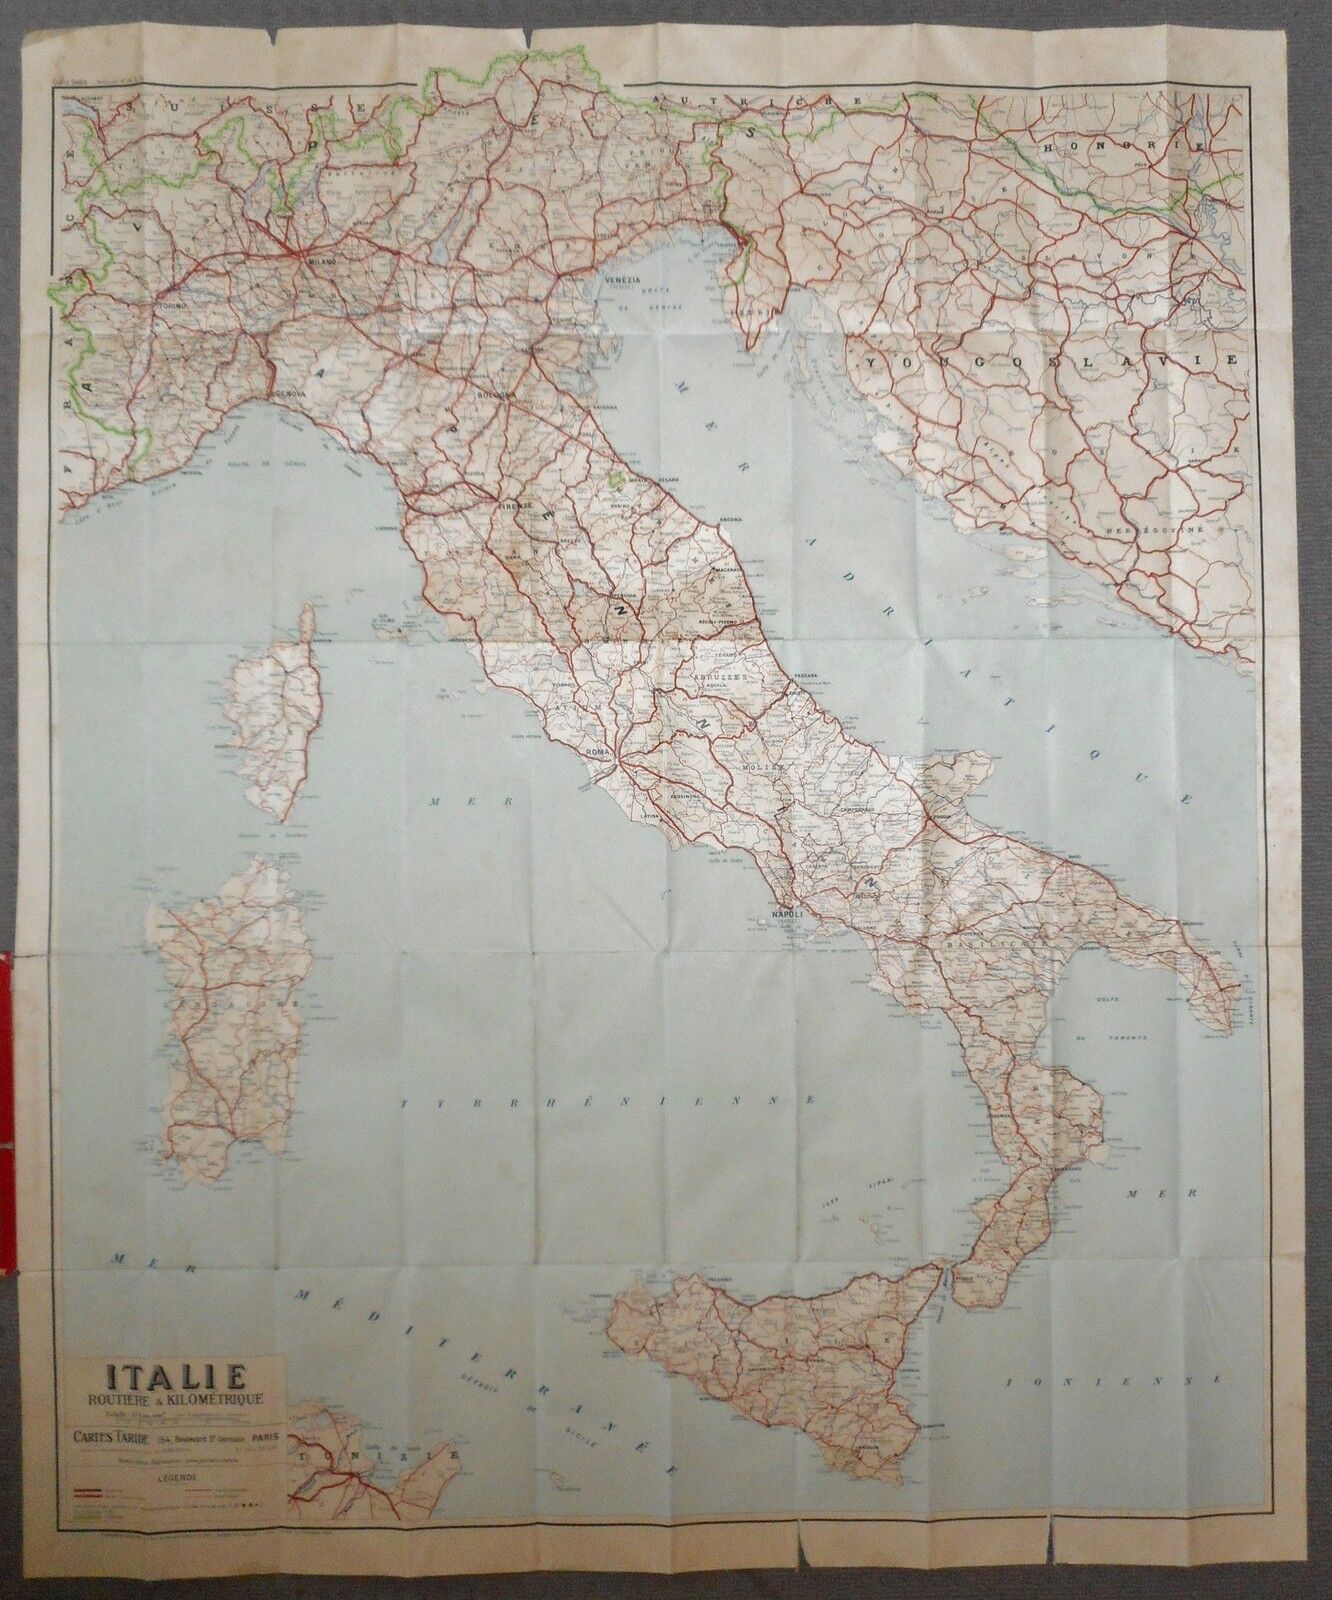 ITALY - ANTIQUE MAP - 1954 - Full Color - FRENCH SCHOOL ROOM - ROME, MILAN, PISA